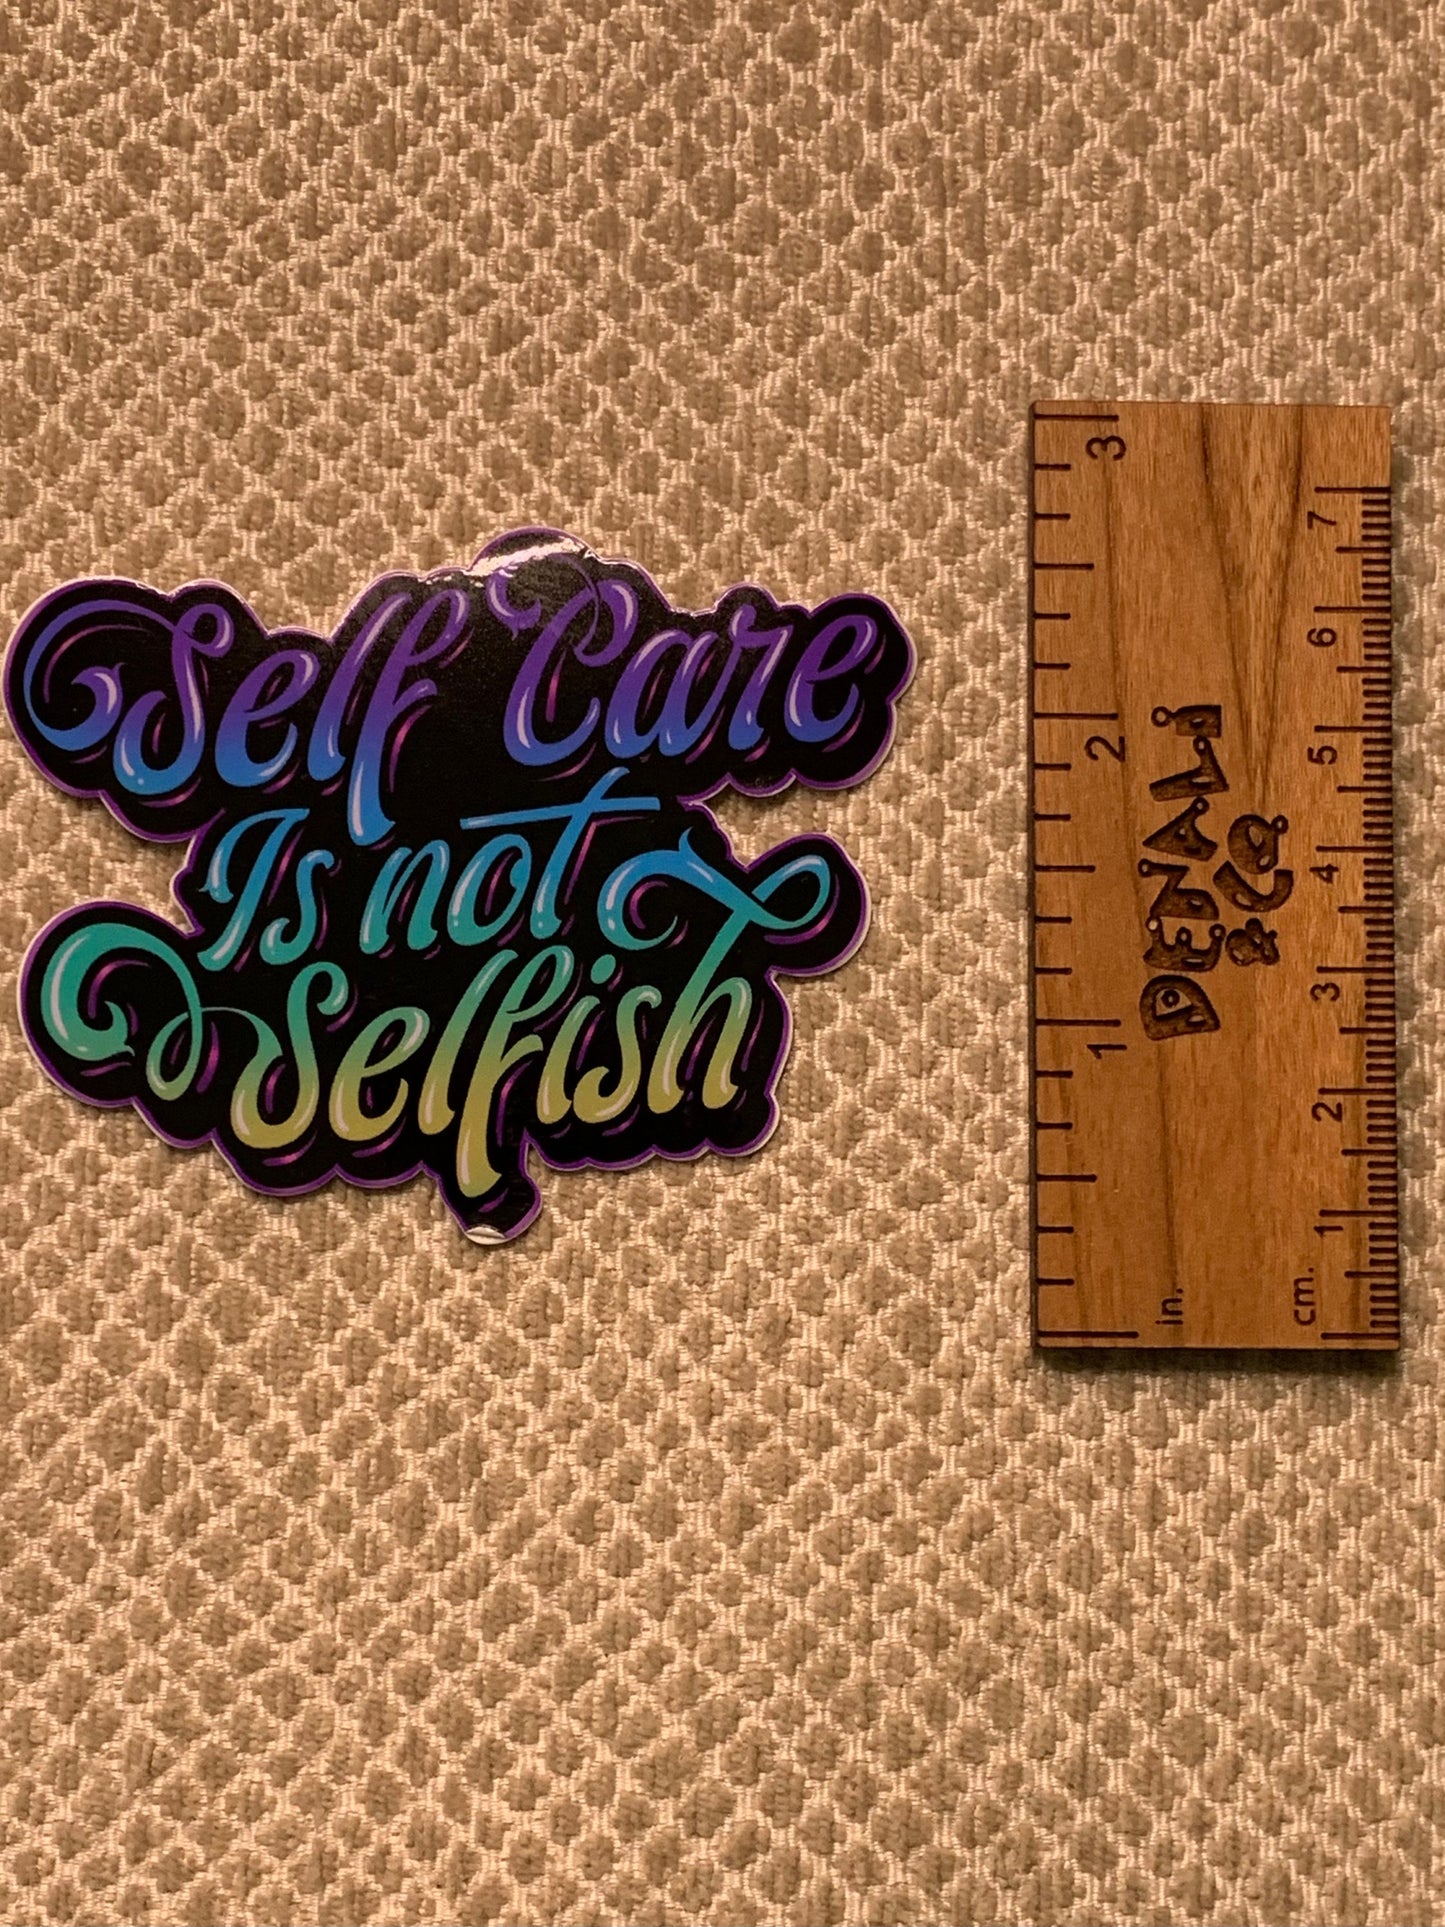 Self-Care is Not Selfish Vinyl Sticker, Vinyl Decal, Laptop Sticker, Gifts for Her, Encouragement Gift, Recovery